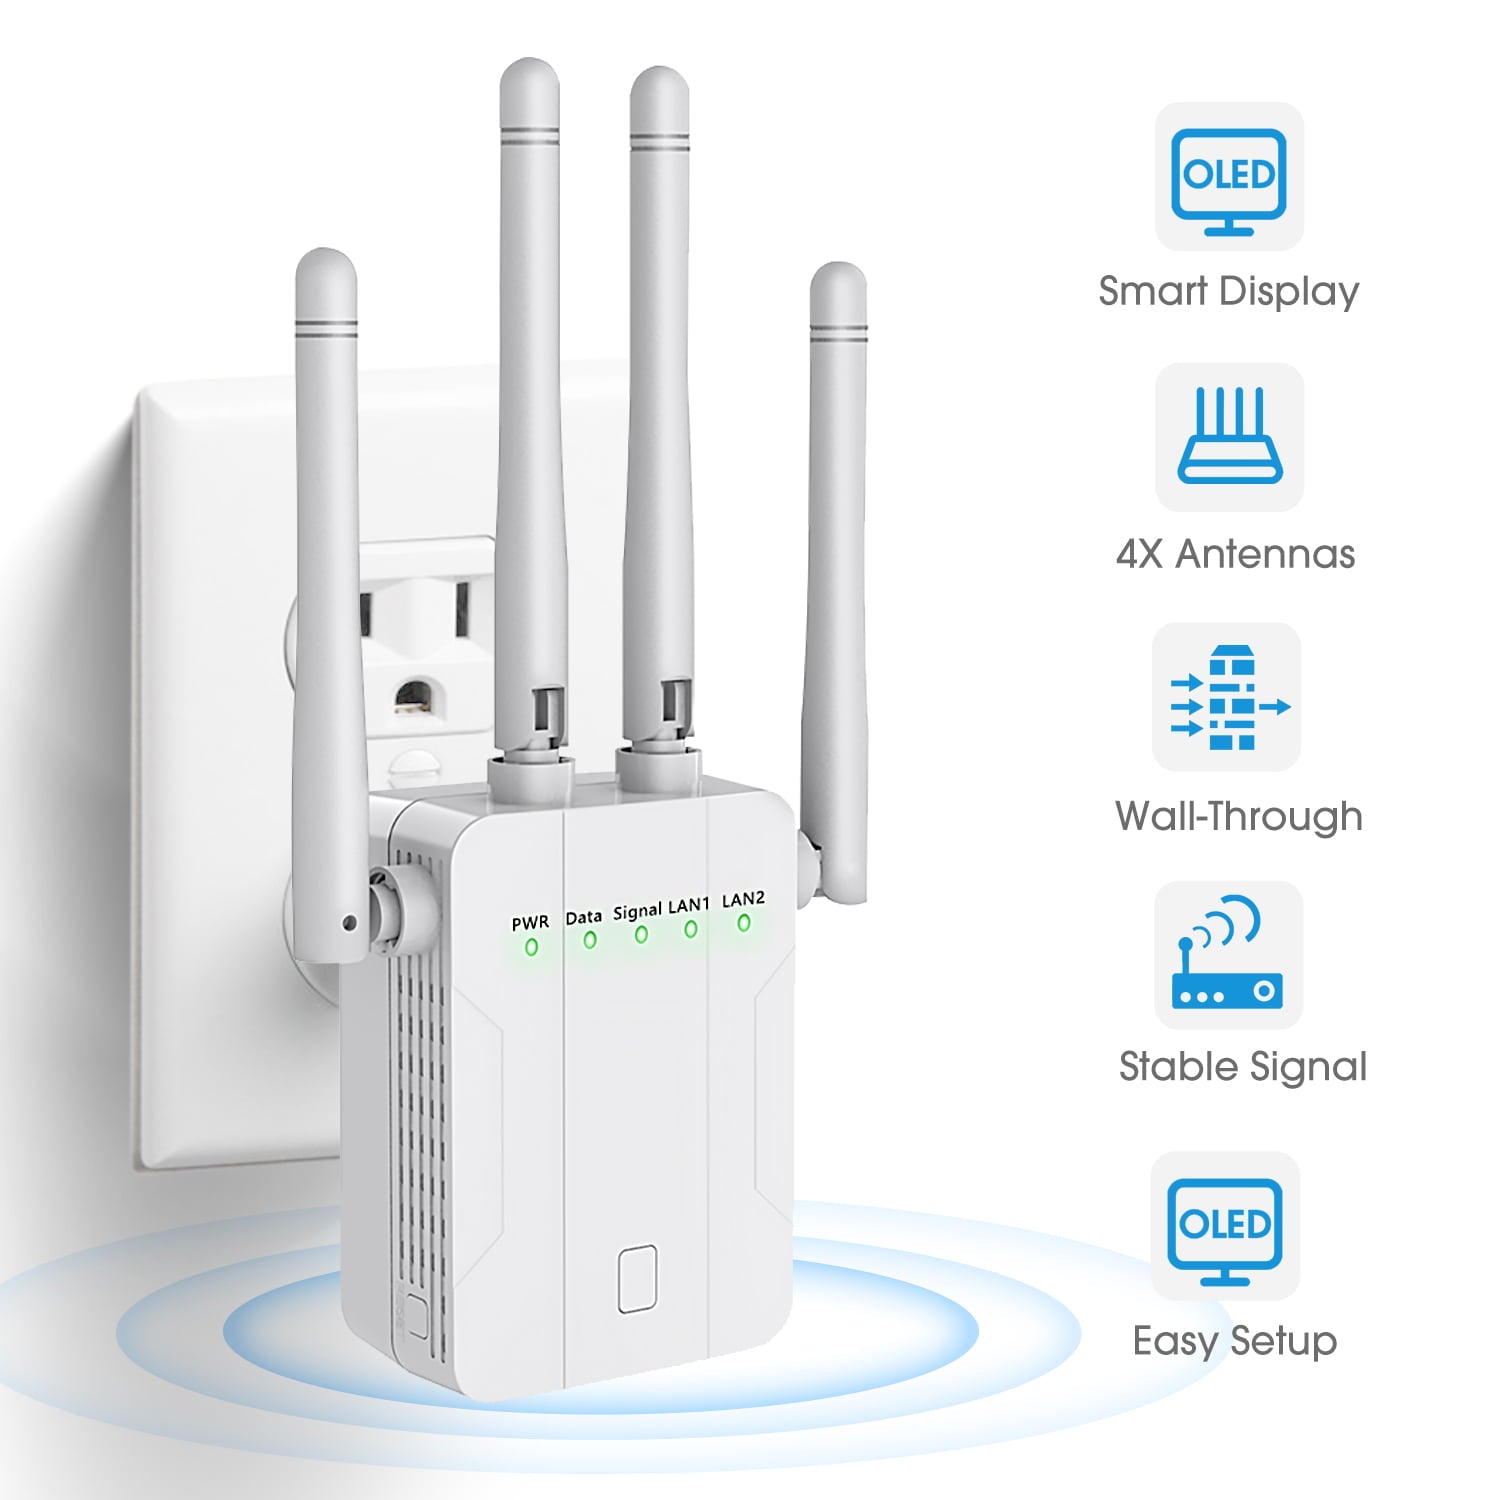 WiFi Range Extenders Signal Booster Up to 1000Mbps for Home, WiFi Booster Repeater 2.4 GHz WPS Wireless Signal Strong Penetrability, Wide Range of Signals(3500 sq.ft)